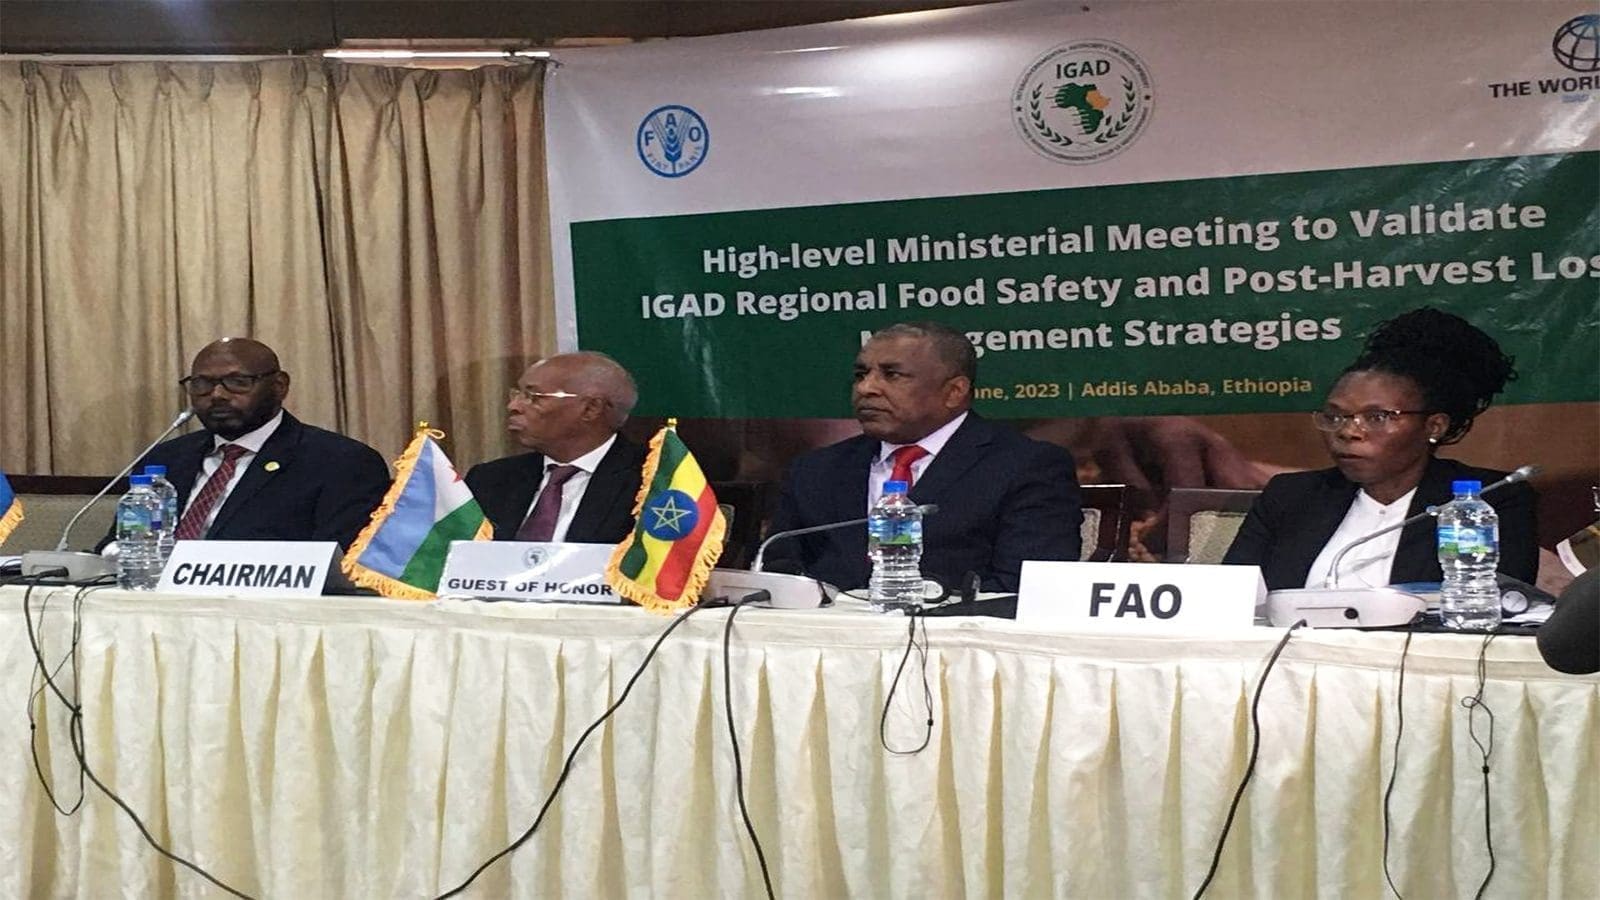 IGAD Ministers endorse regional food safety, post-harvest loss management strategies